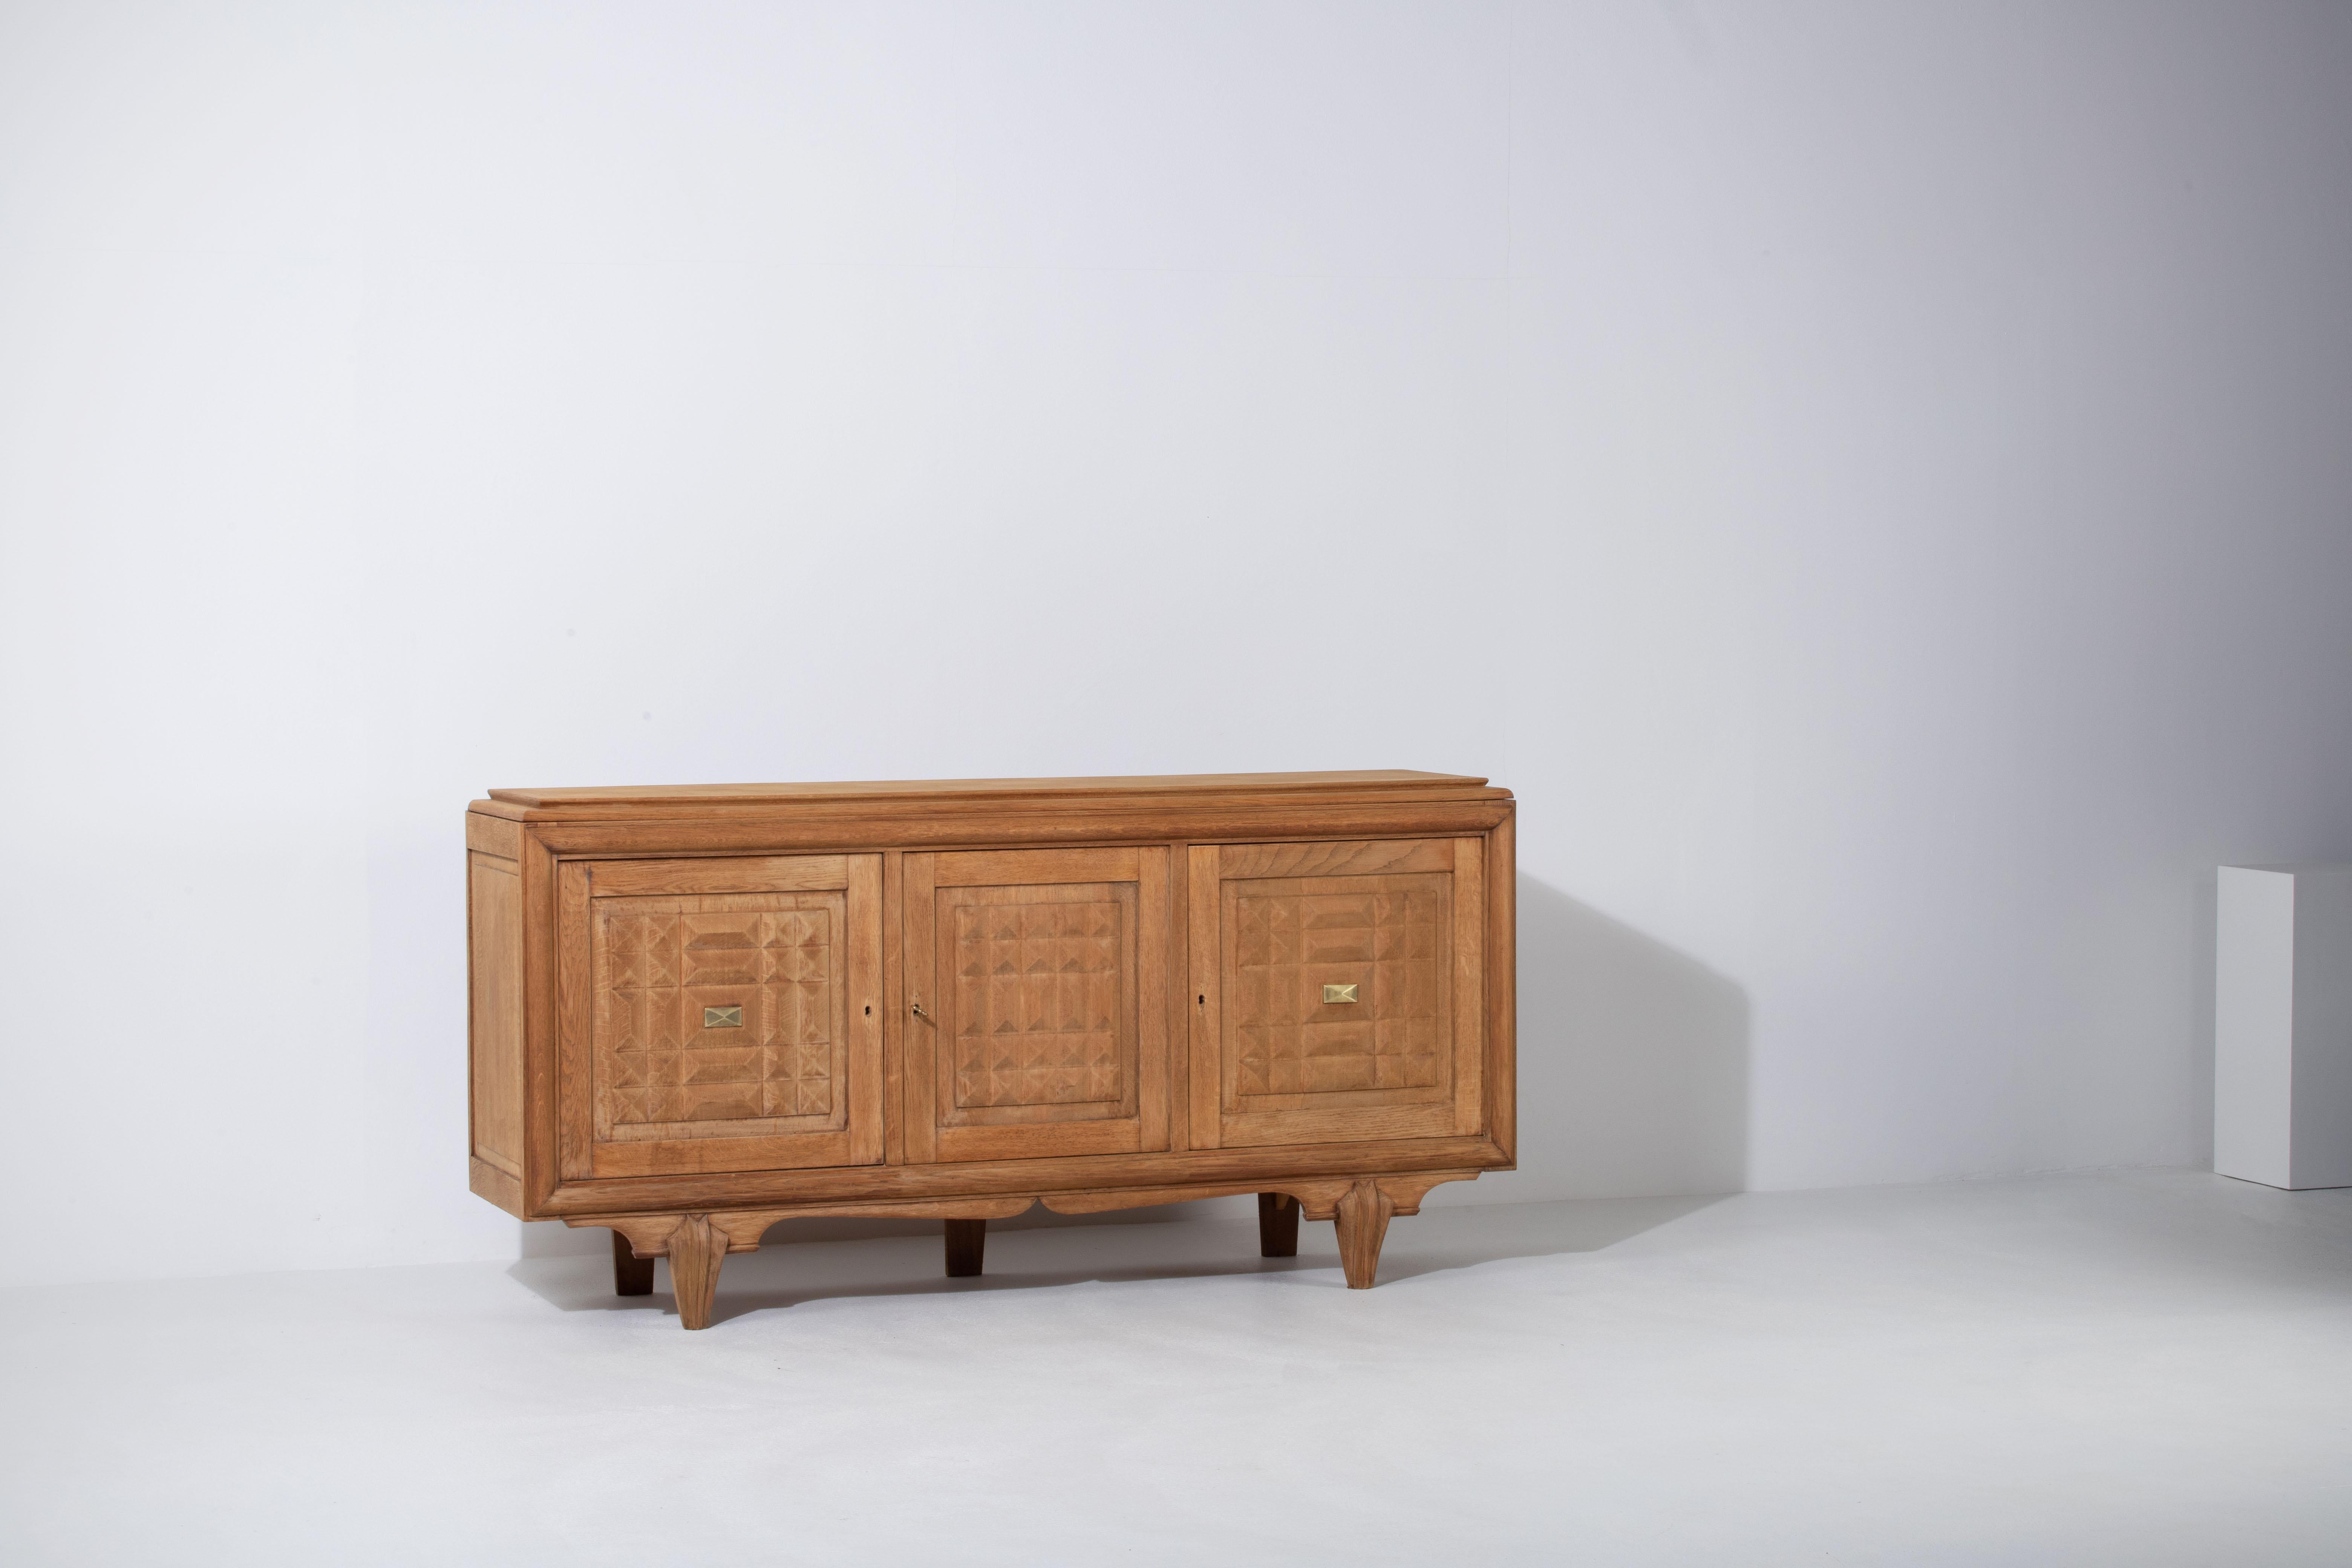 Credenza, solid oak, France, 1940s.
Art Deco Brutalist sideboard. 
The credenza consists of three storage facilities and covered with very detailed designed doors.